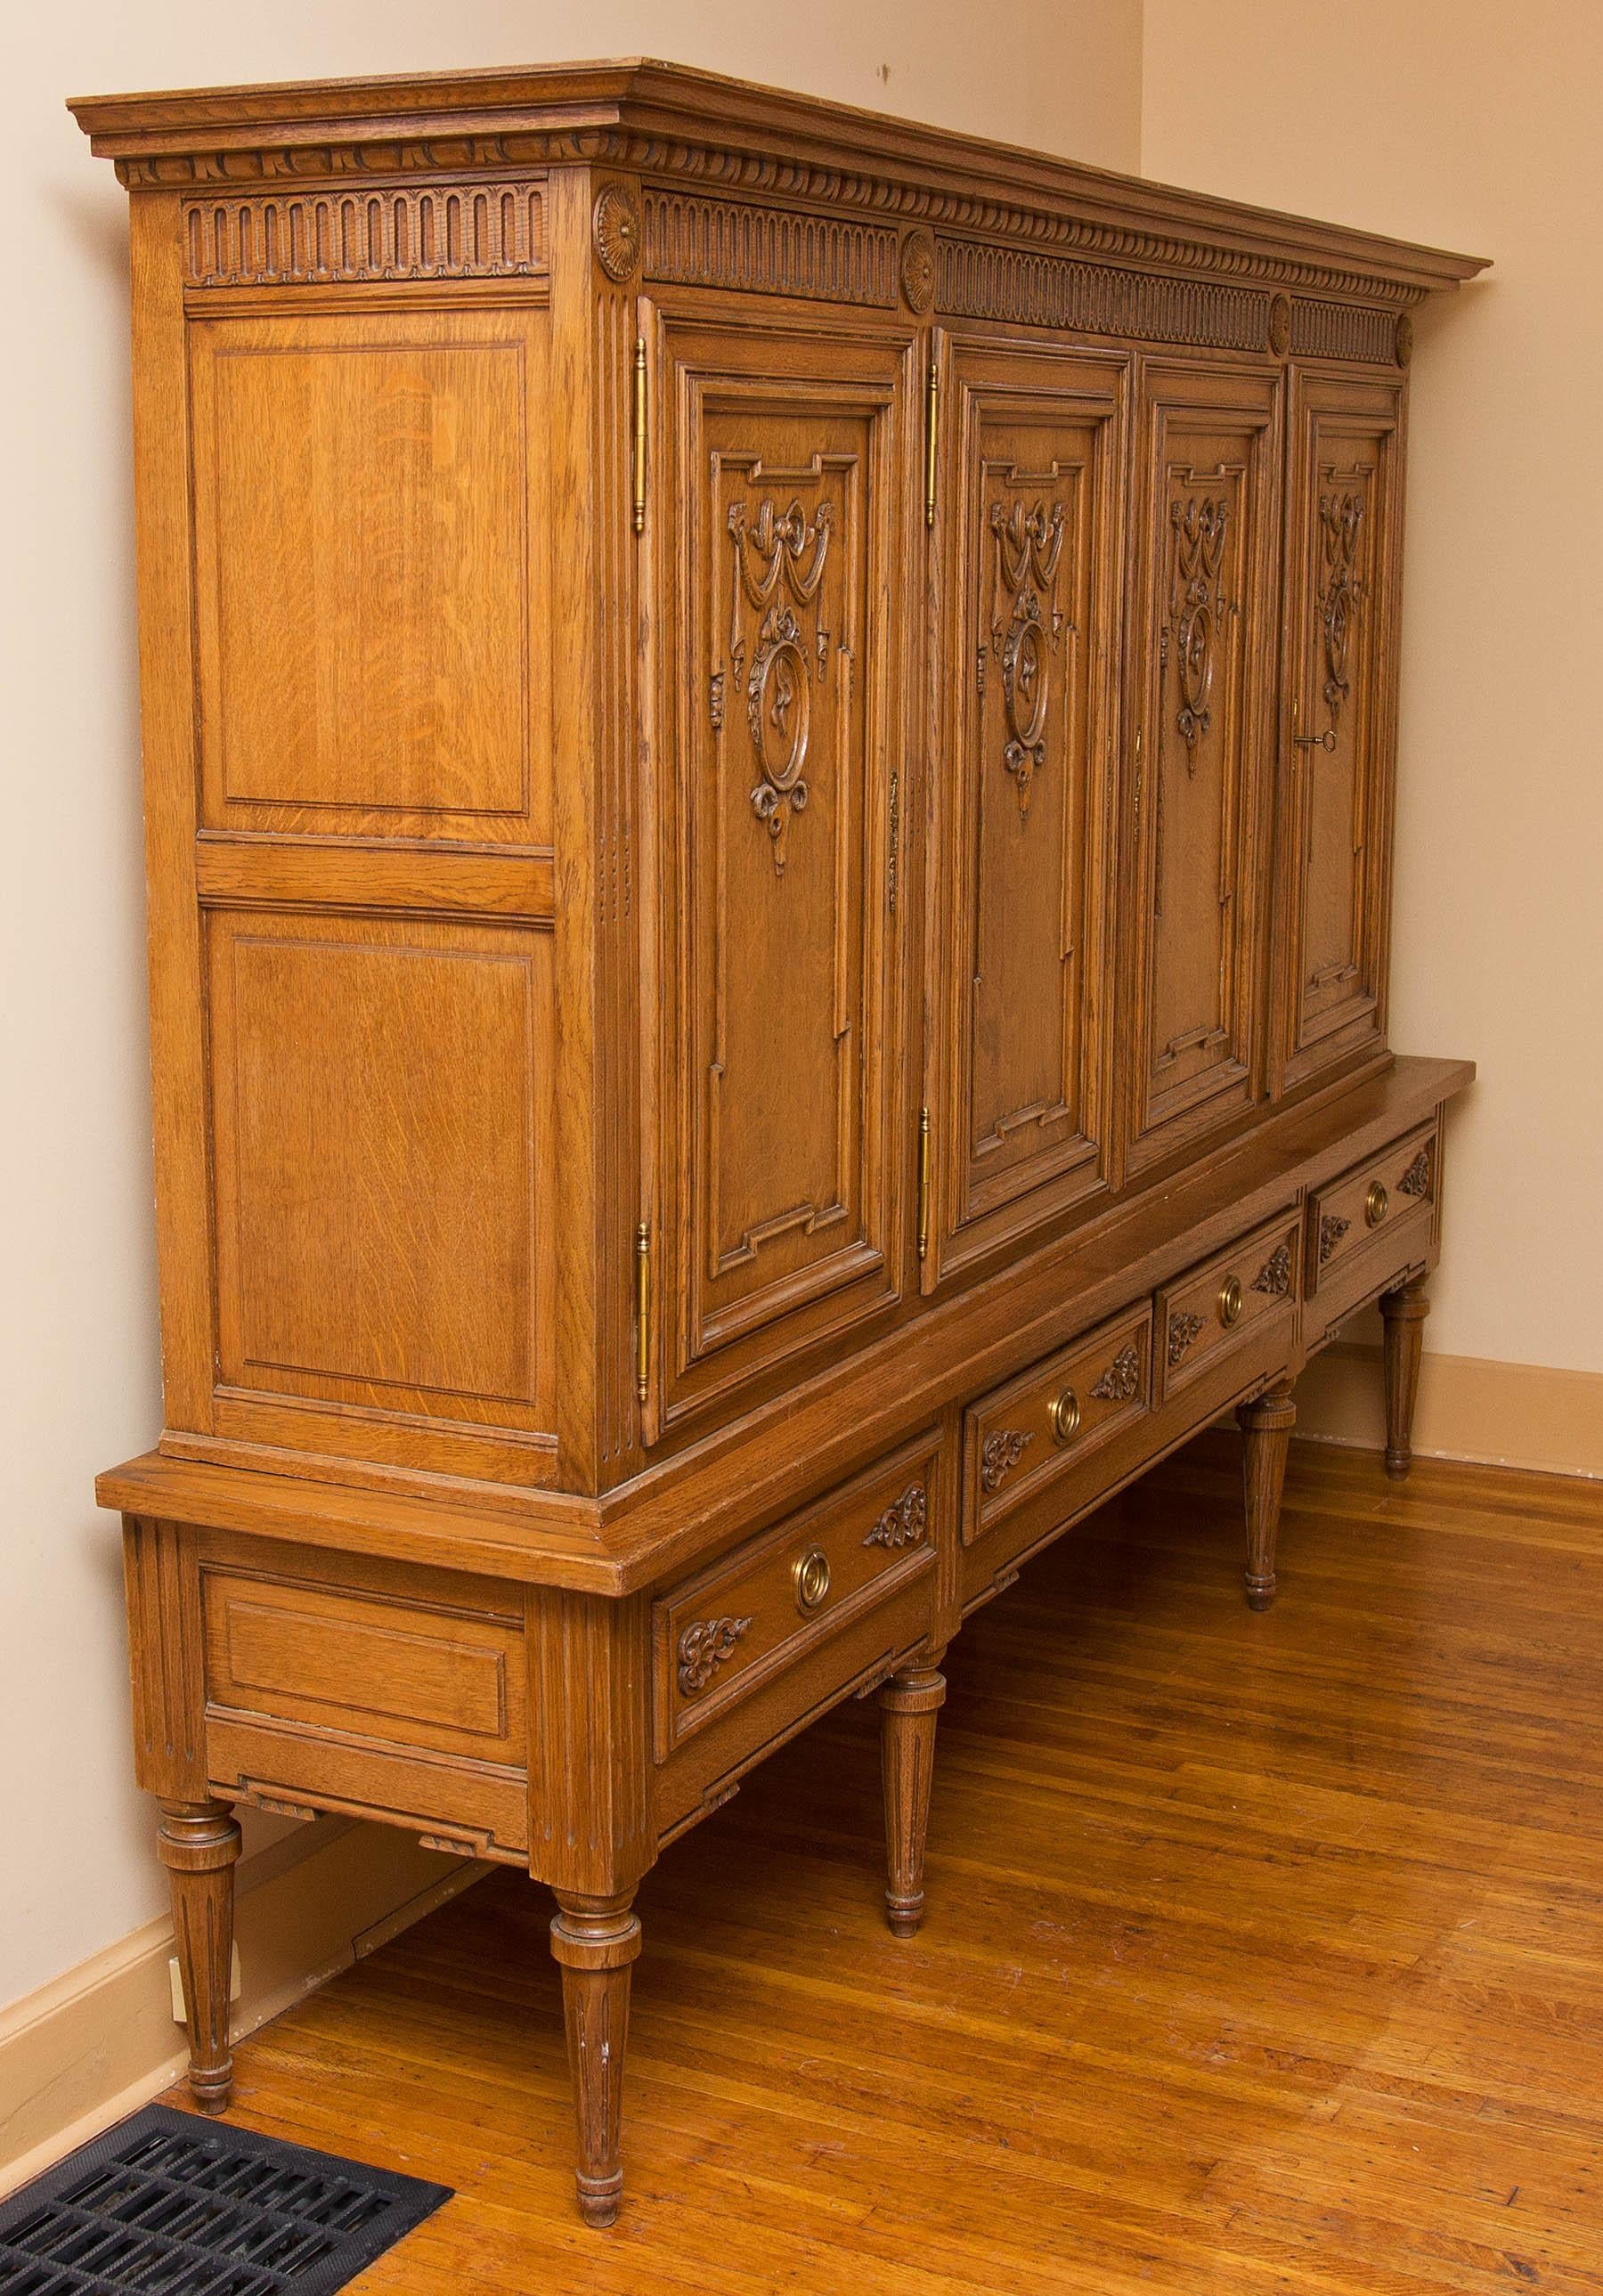 Louis XVI style four-door, four-drawer cabinet. An unusual size. Lots of storage. The top is finished. The height makes the top great for displaying objects. Solid quarter sawn white oak. Interior fitted with shelving and paper lined. French, early